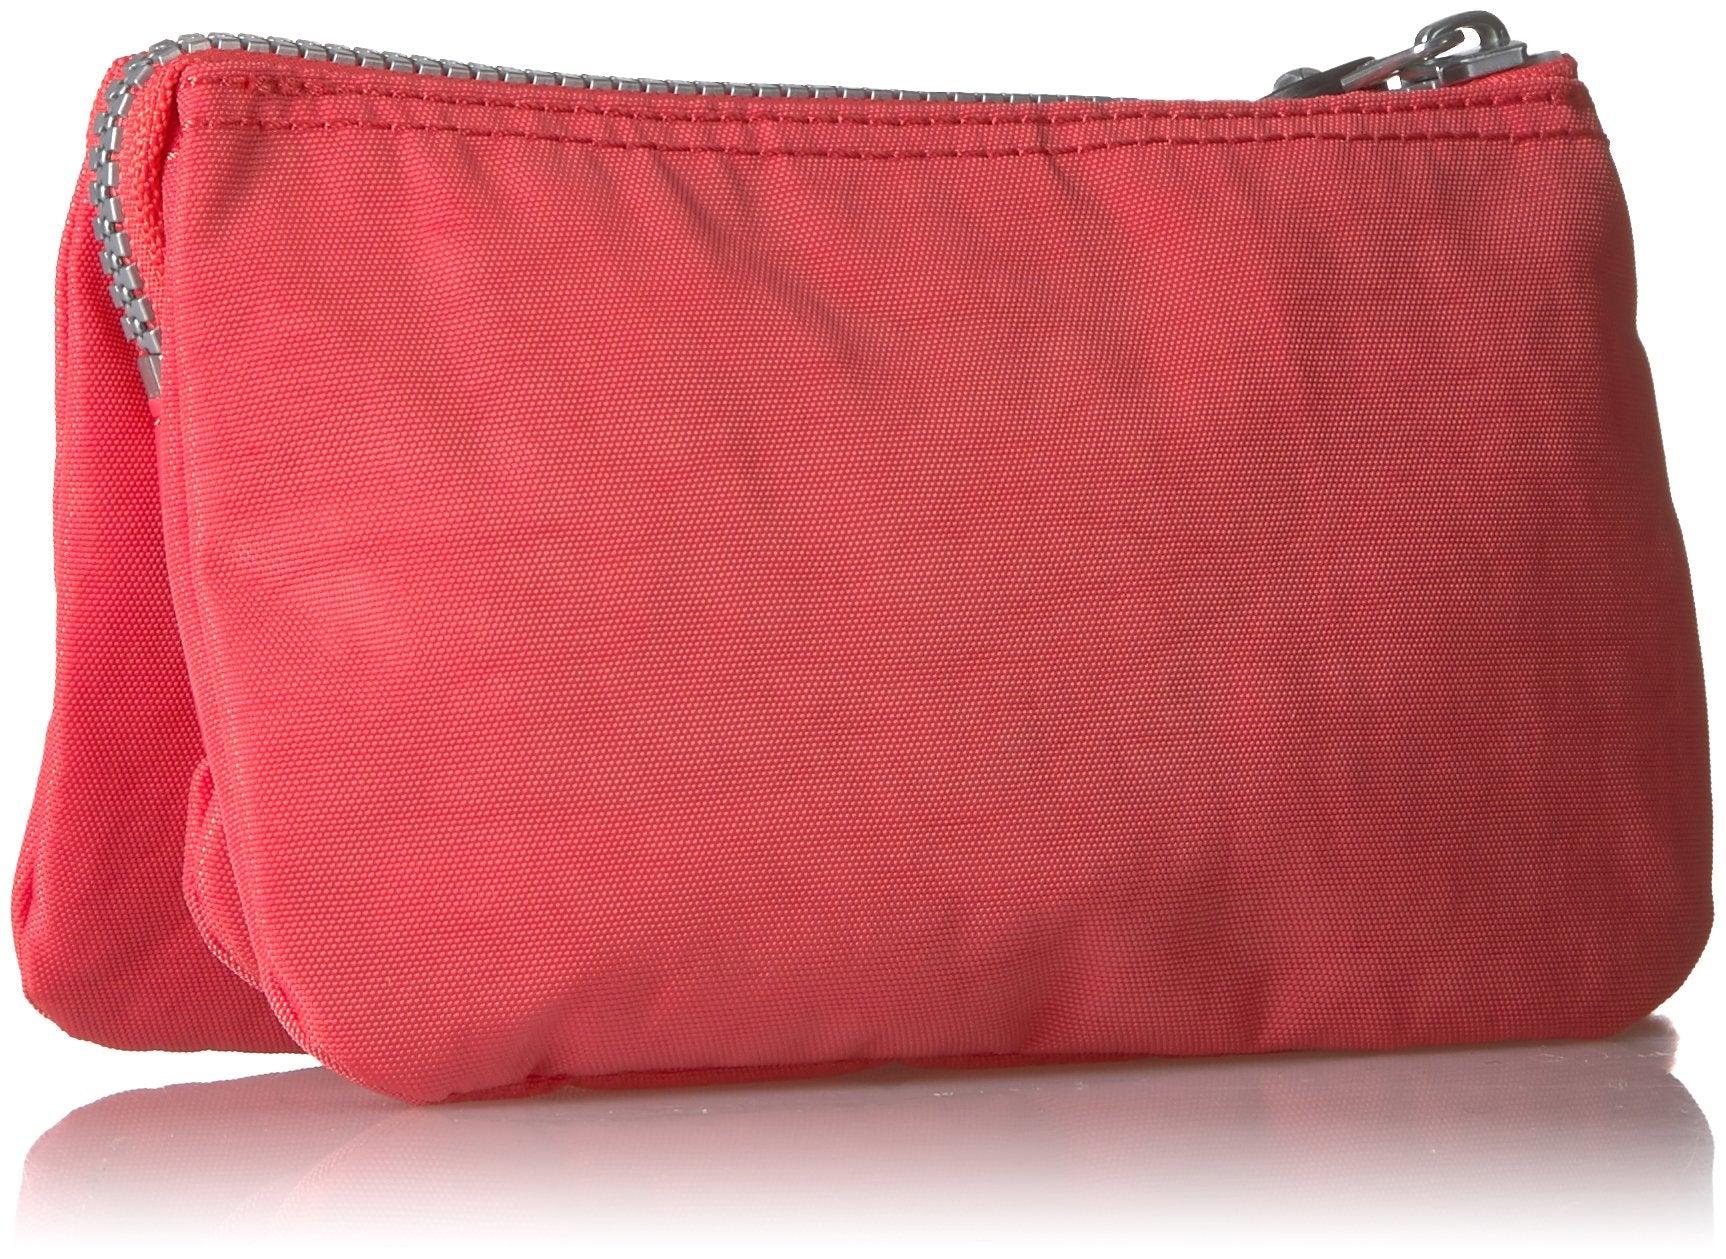 Kipling Creativity Large Pouch Regal Ruby Patch, Regal Red Patch